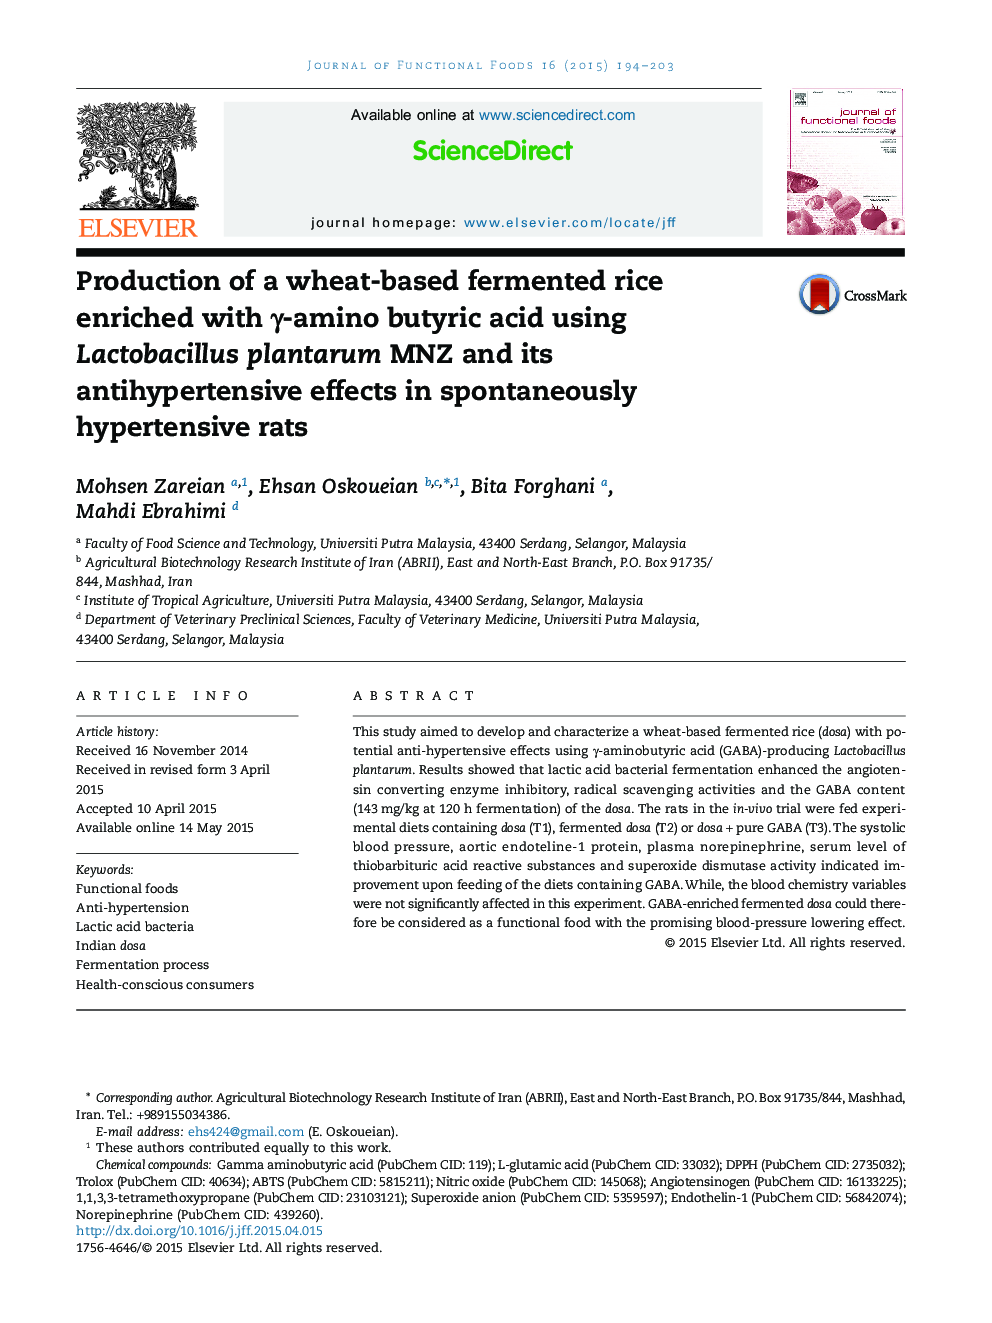 Production of a wheat-based fermented rice enriched with γ-amino butyric acid using Lactobacillus plantarum MNZ and its antihypertensive effects in spontaneously hypertensive rats